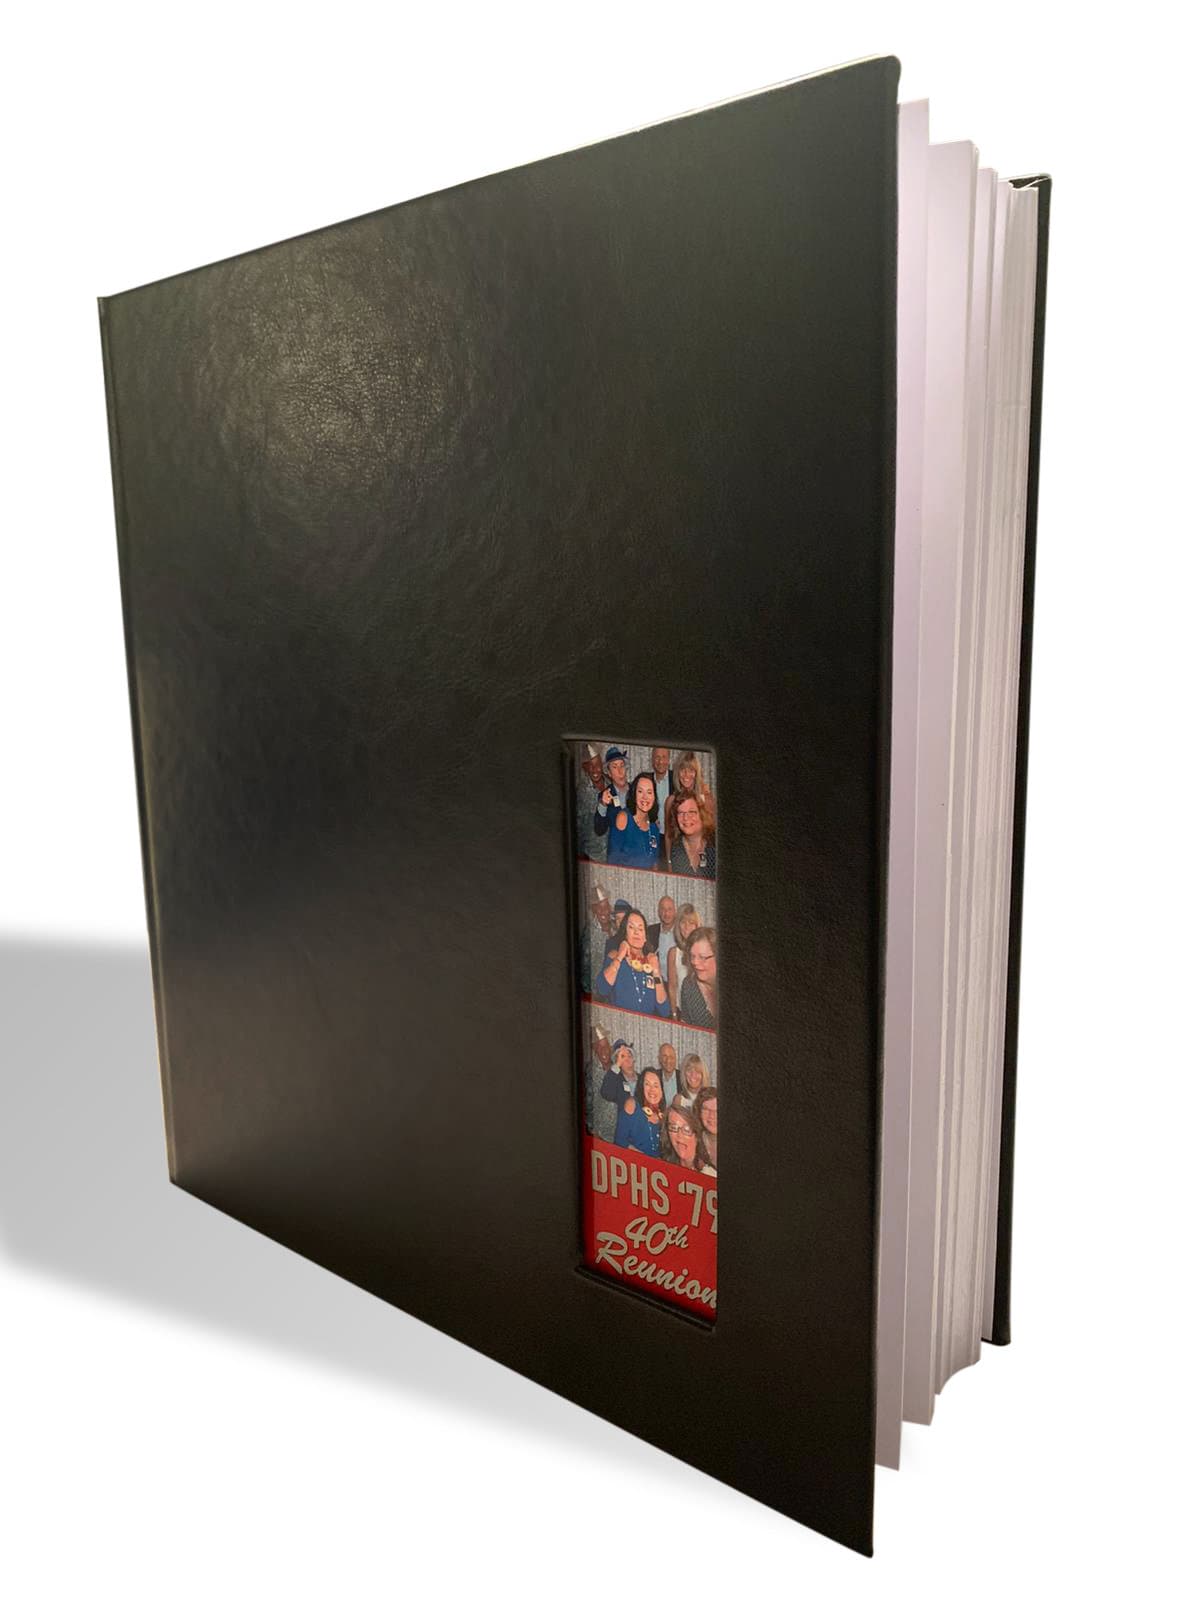 Buy Photo Booth Album for 2x6 Photo Strips Holds 216 Photobooth Photos on  54 Pages Slide-in Photo Booth Photo Album Wedding Scrapbook Online in India  